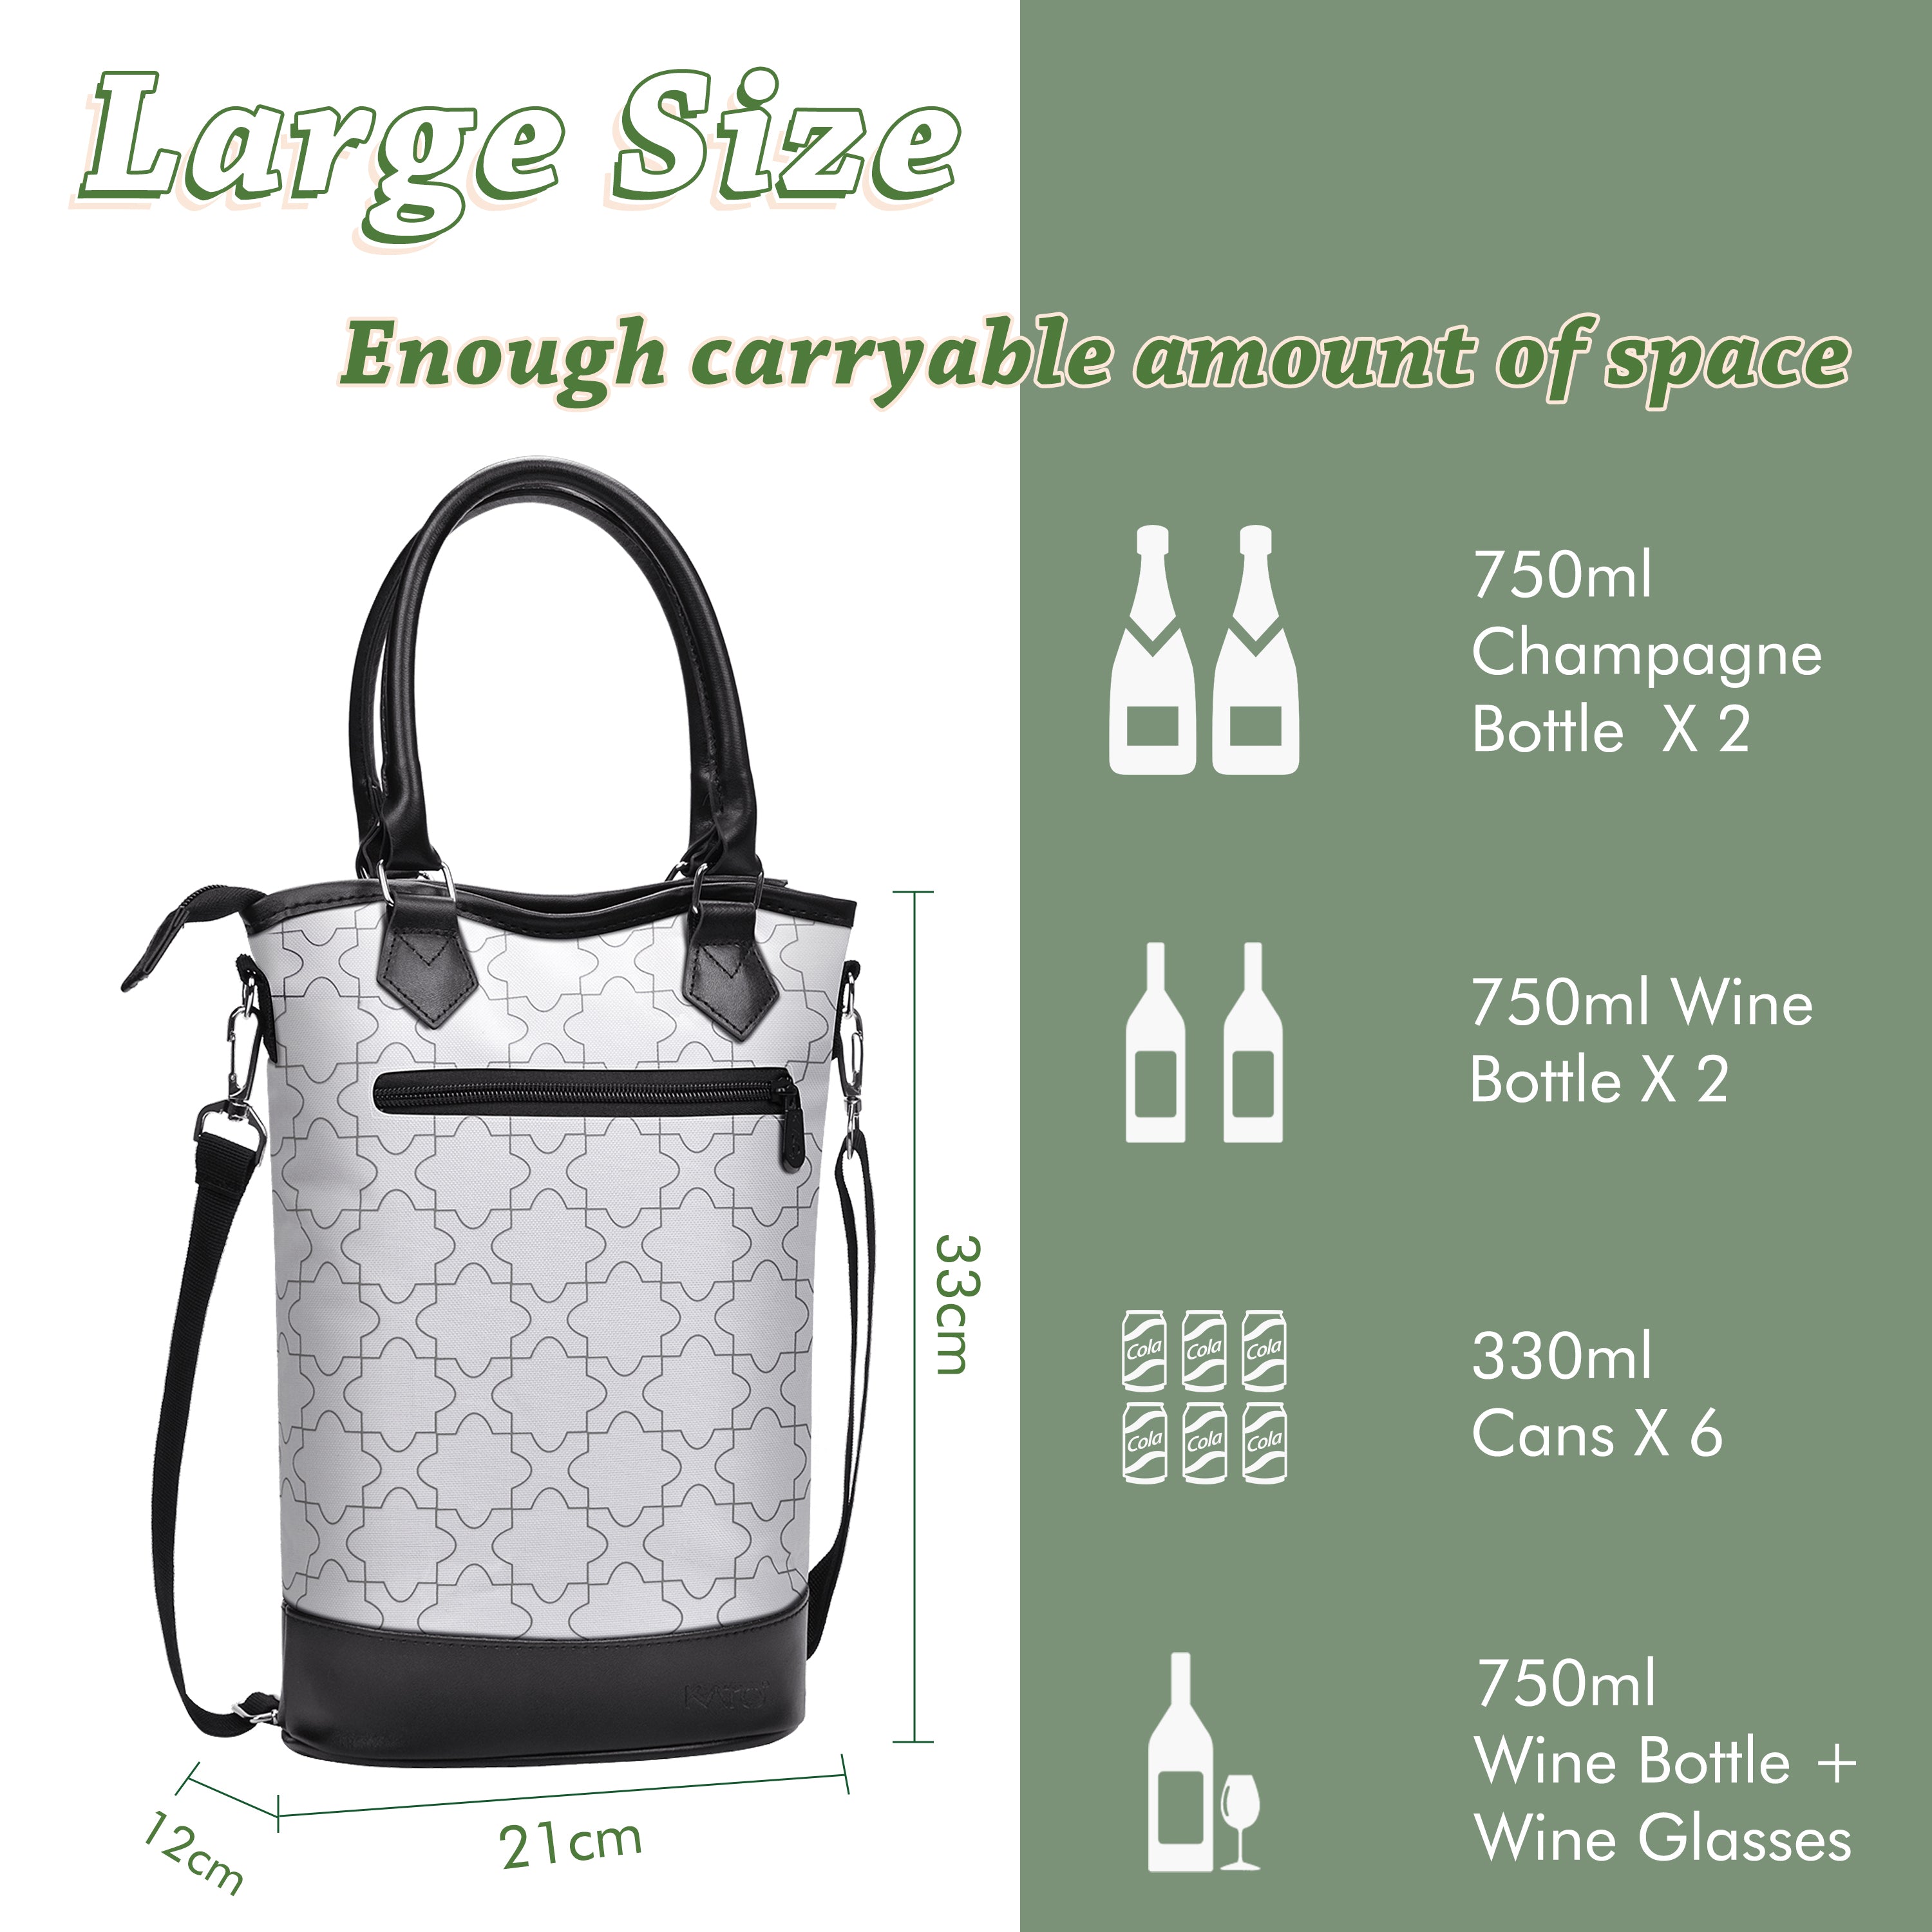 Tirrinia Insulated Wine Carrier Tote - Travel Padded 2 Bottle  Wine/Champagne Cooler Bag with Handle and Adjustable Shoulder Strap + Free  Corkscrew